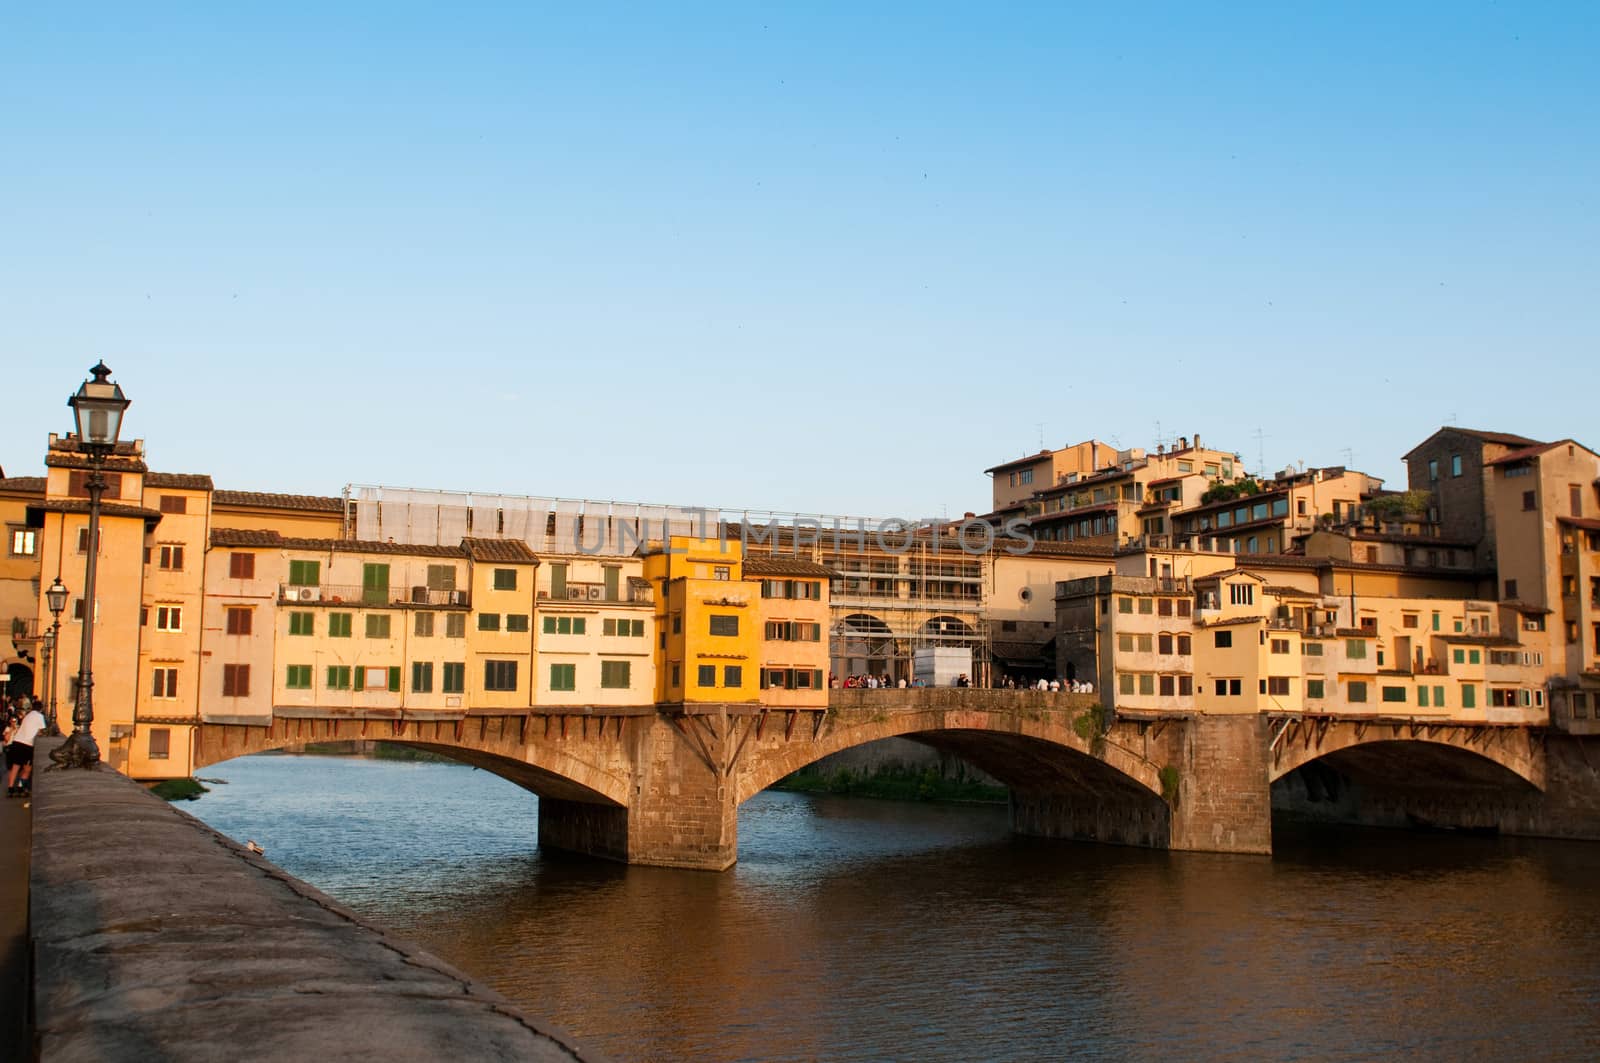 Crowds of tourists visit the Ponte Vecchio ("Old Bridge") which is a Medieval bridge over the Arno River at evening.  Florence, Tuscany, Italy.